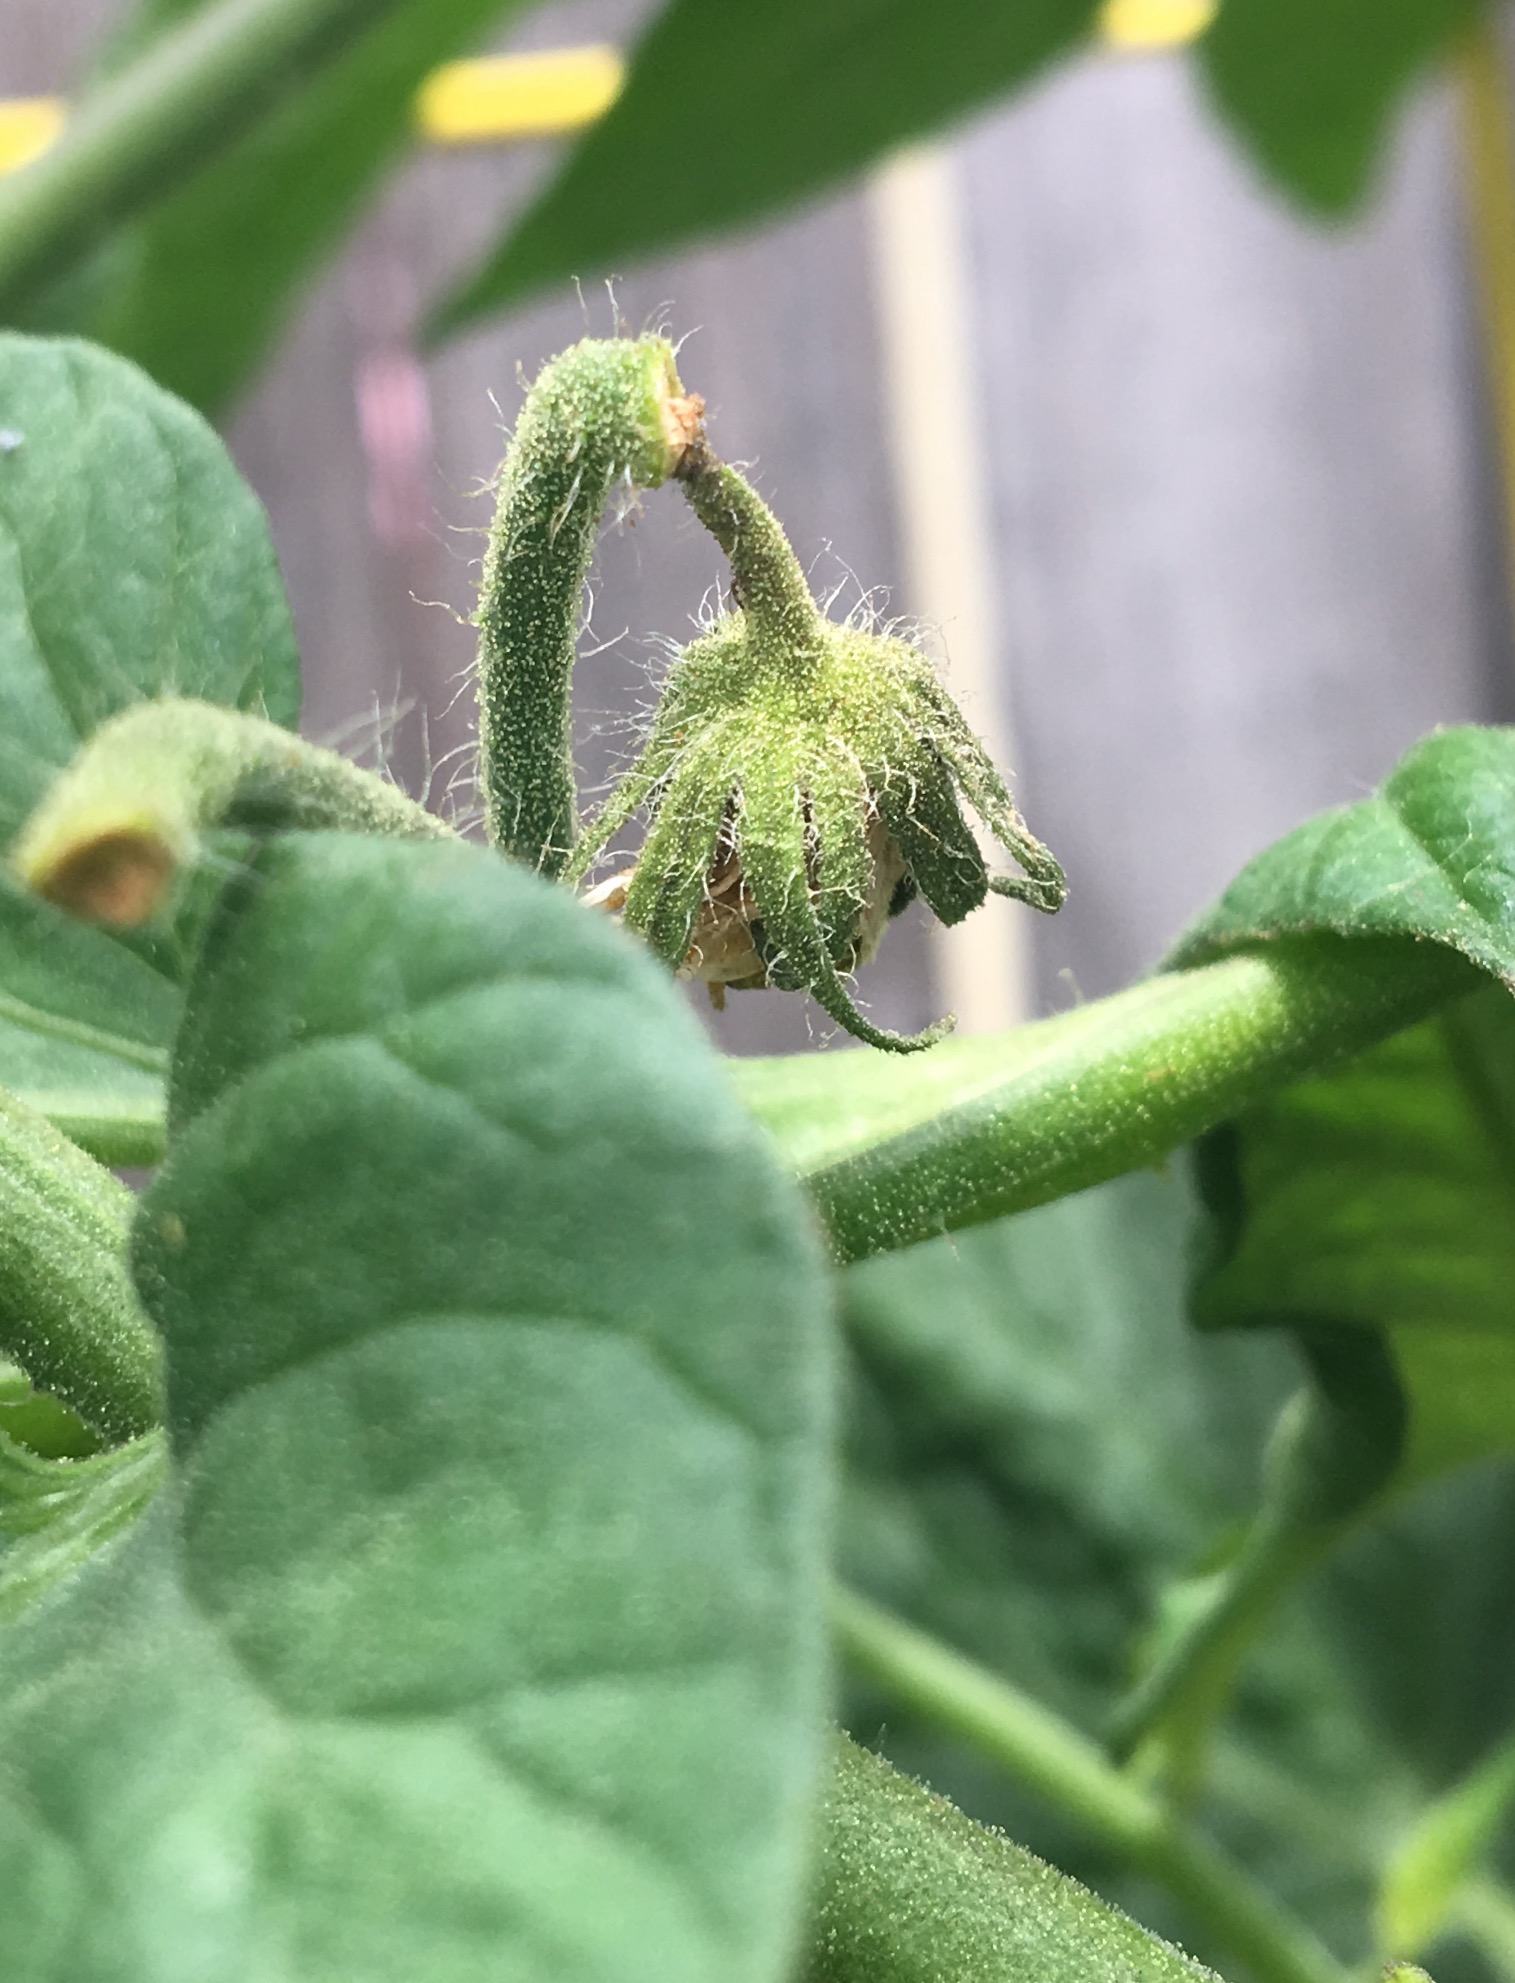 diagnosis - Why are the blossoms falling off my tomato plant ...